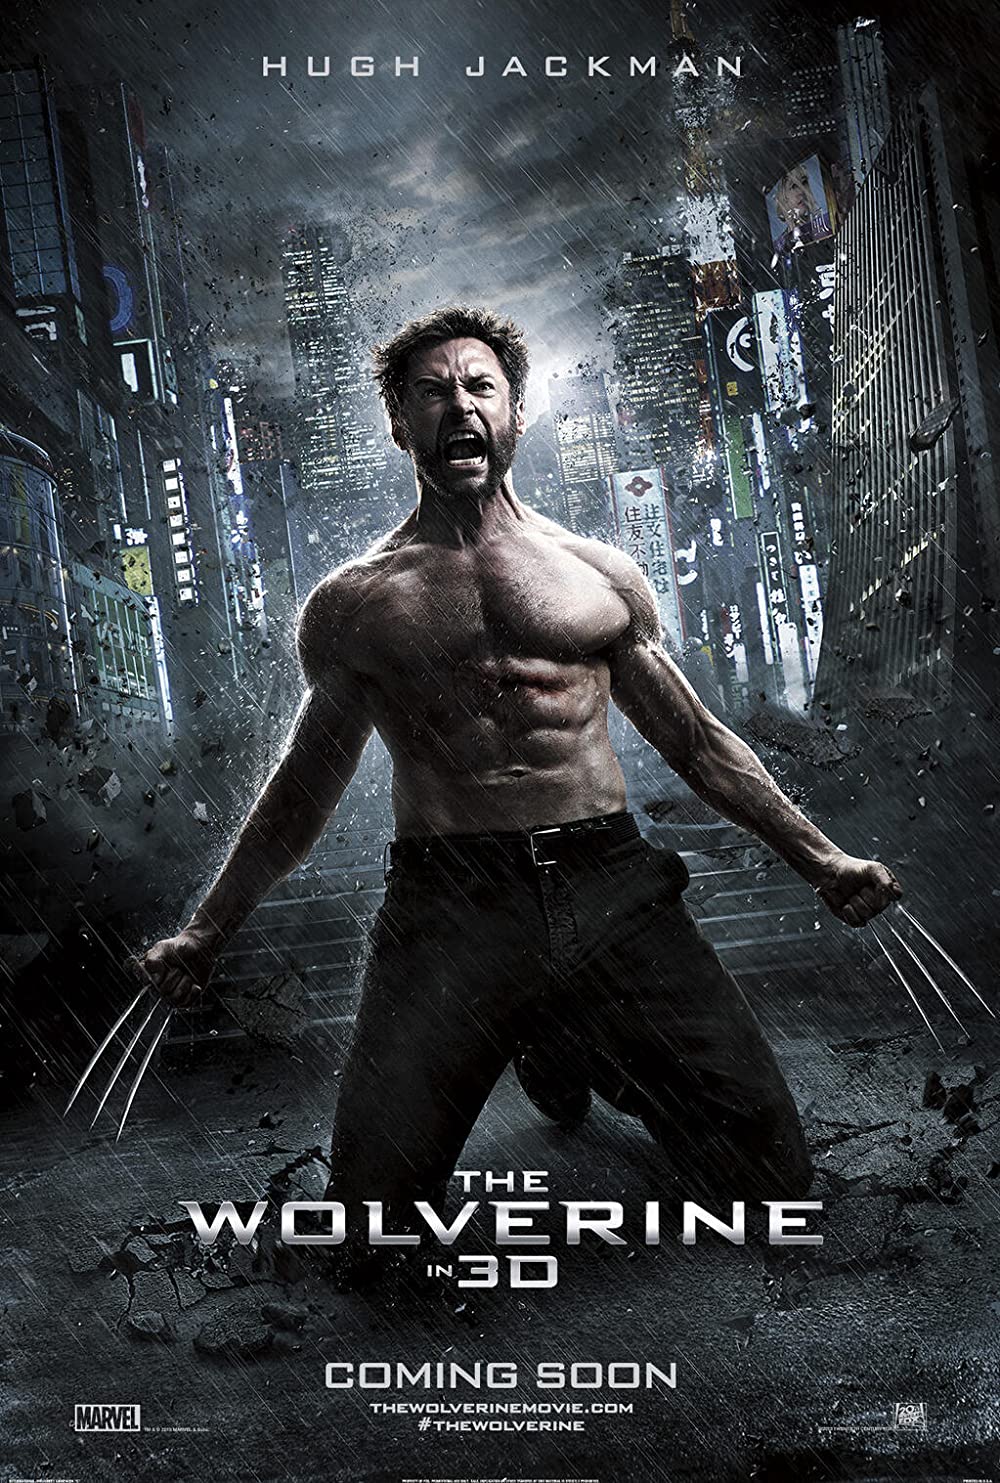 FULL MOVIE: The Wolverine (2013) [Action]